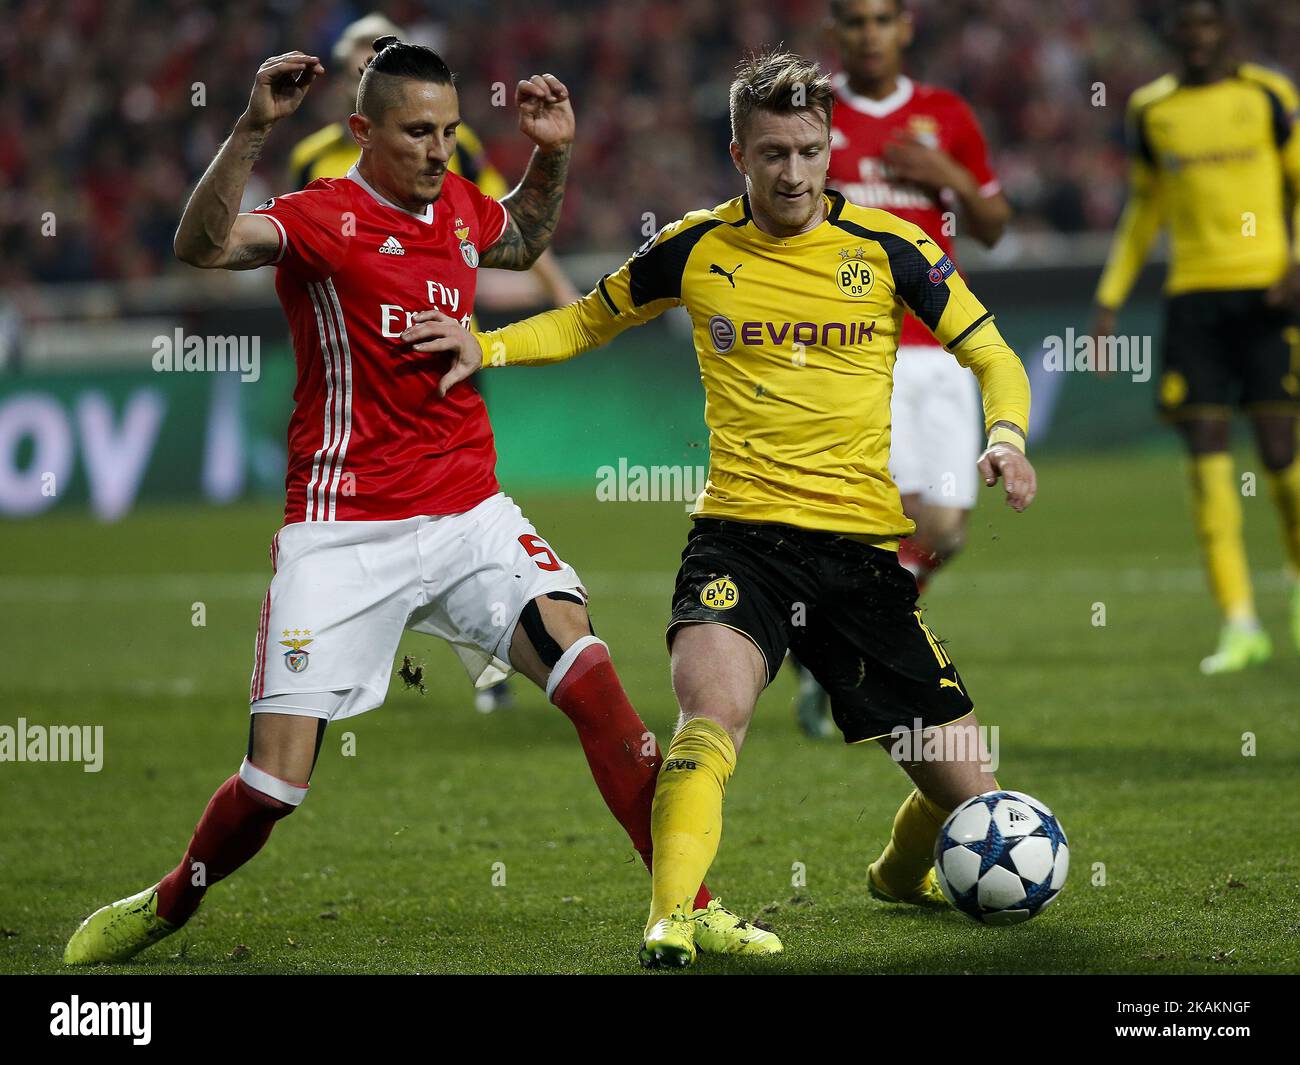 Benfica's midfielder Ljubomir Fejsa (L) vies for the ball with Dortmund's midfielder Marco Reus (R) during Champions League 2016/17 match between SL Benfica vs BVB Borussia Dortmund, in Lisbon, on February 14, 2017. (Photo by Carlos Palma/NurPhoto) *** Please Use Credit from Credit Field *** Stock Photo